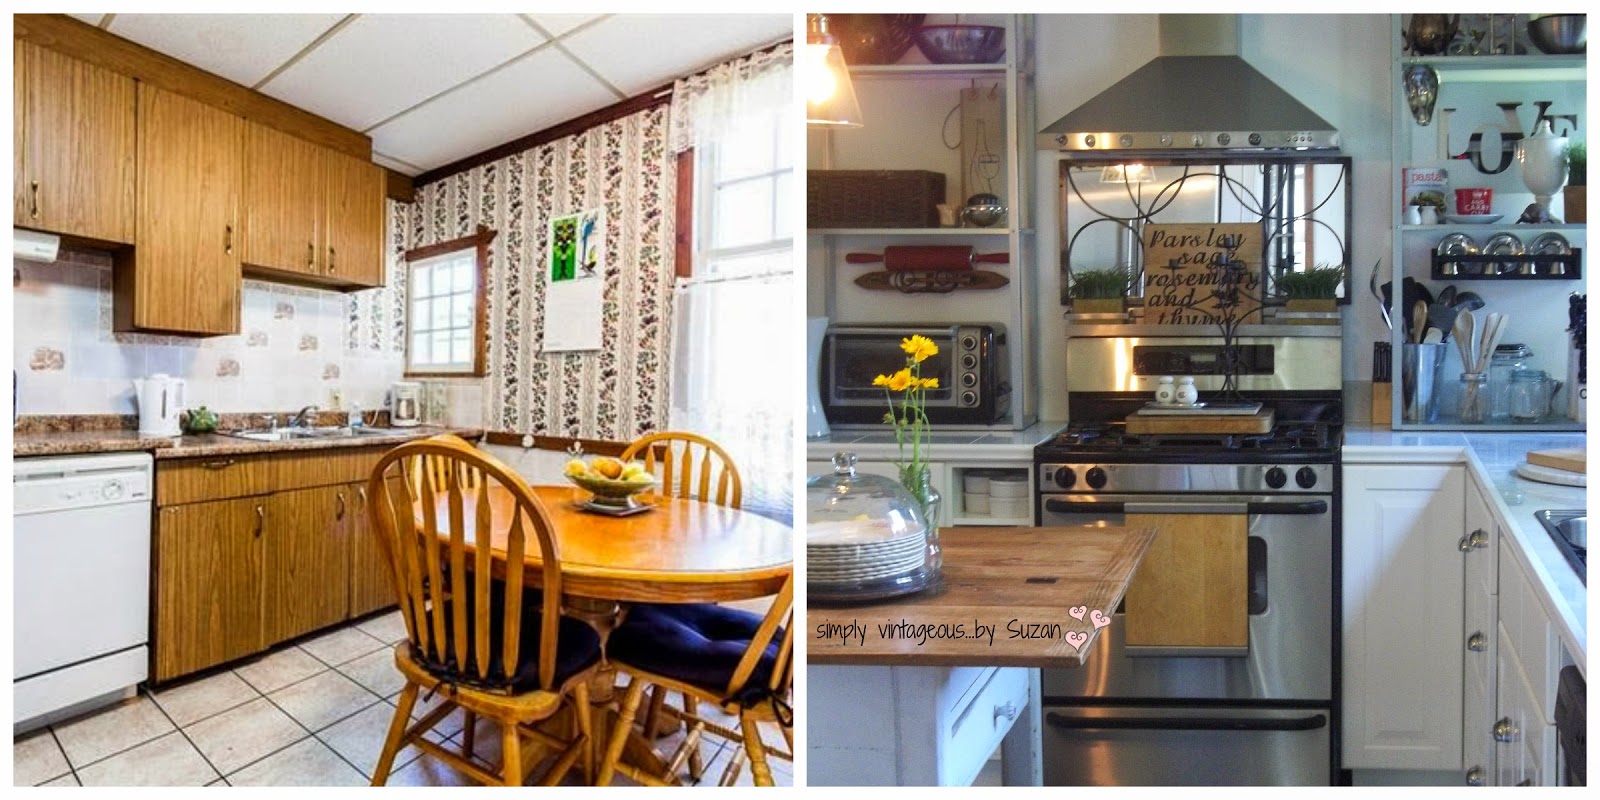 Before and after - a Kitchen makeover